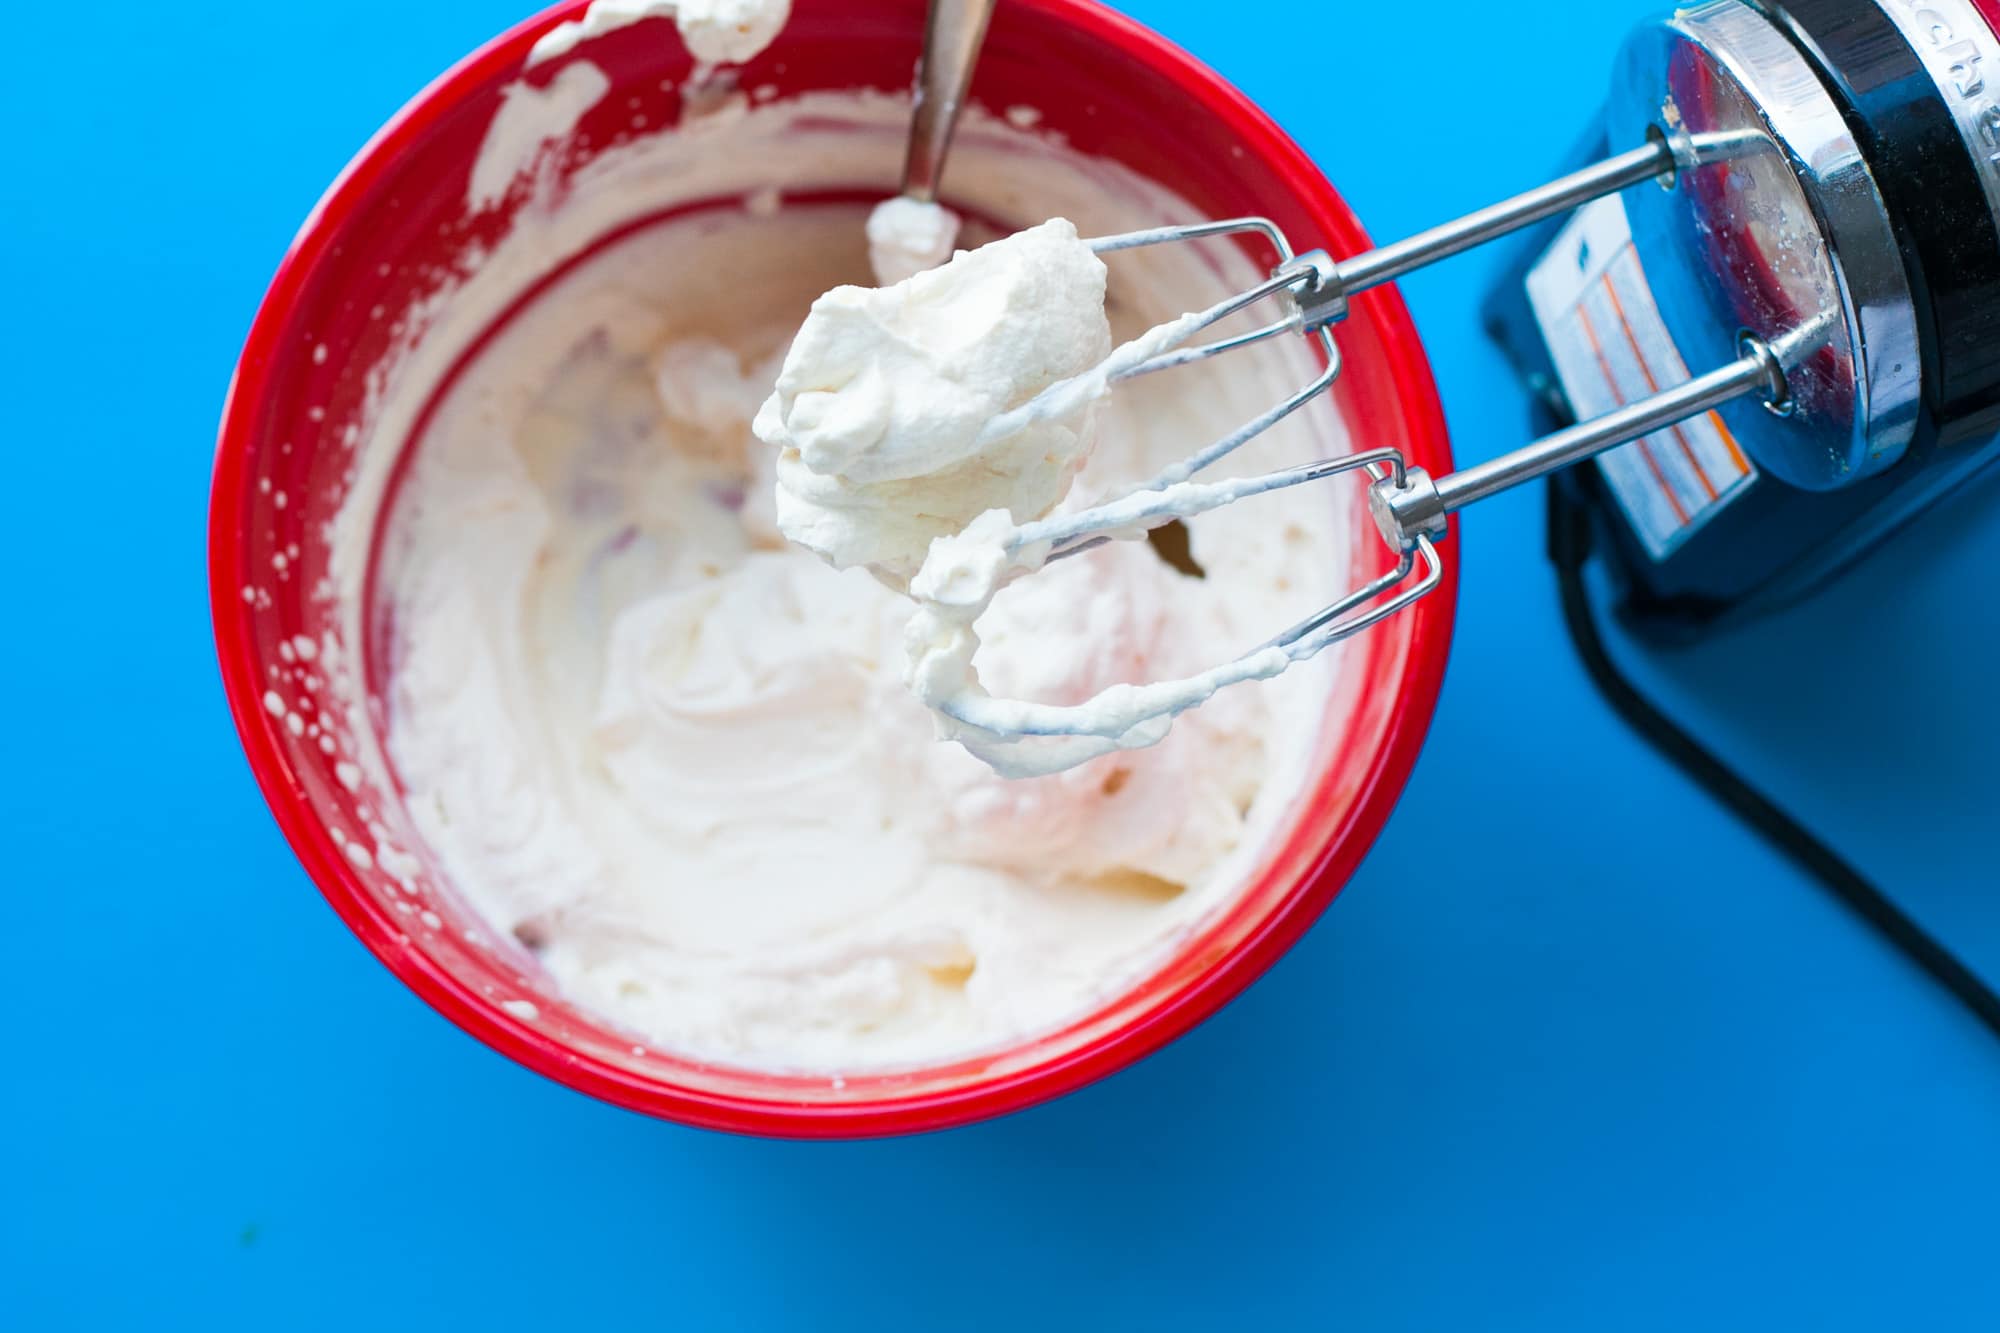 Making whipped cream with electric mixer.